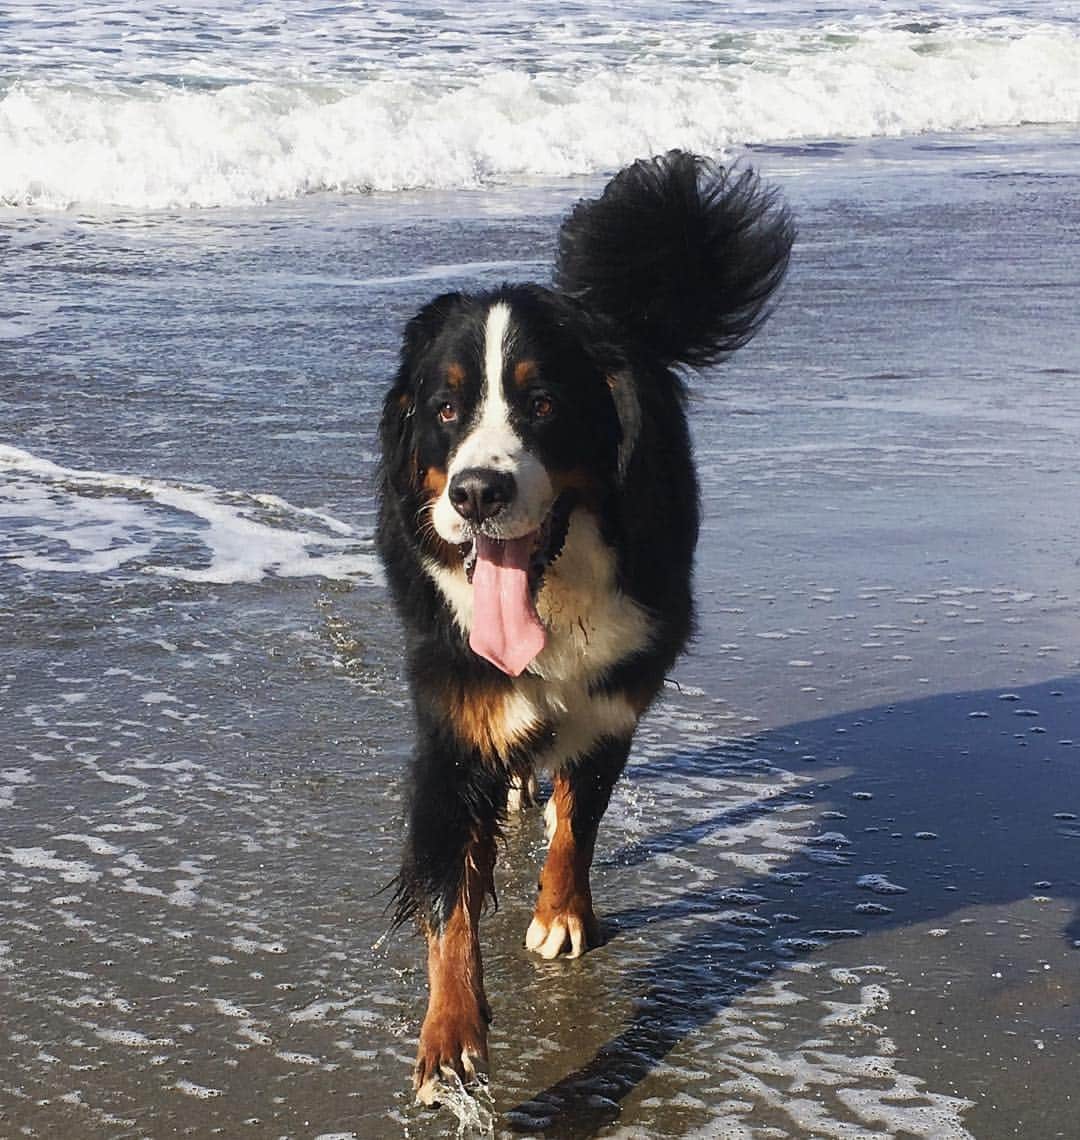 Mike Kriegerのインスタグラム：「Starting today, you can follow hashtags on Instagram and discover more photos and videos around your interests, hobbies, passions and the communities you care about. In honor of @Junopup, I’m following #bernesemountaindog 🐾  Thanks to @kzk9sf for the Juno pic!」